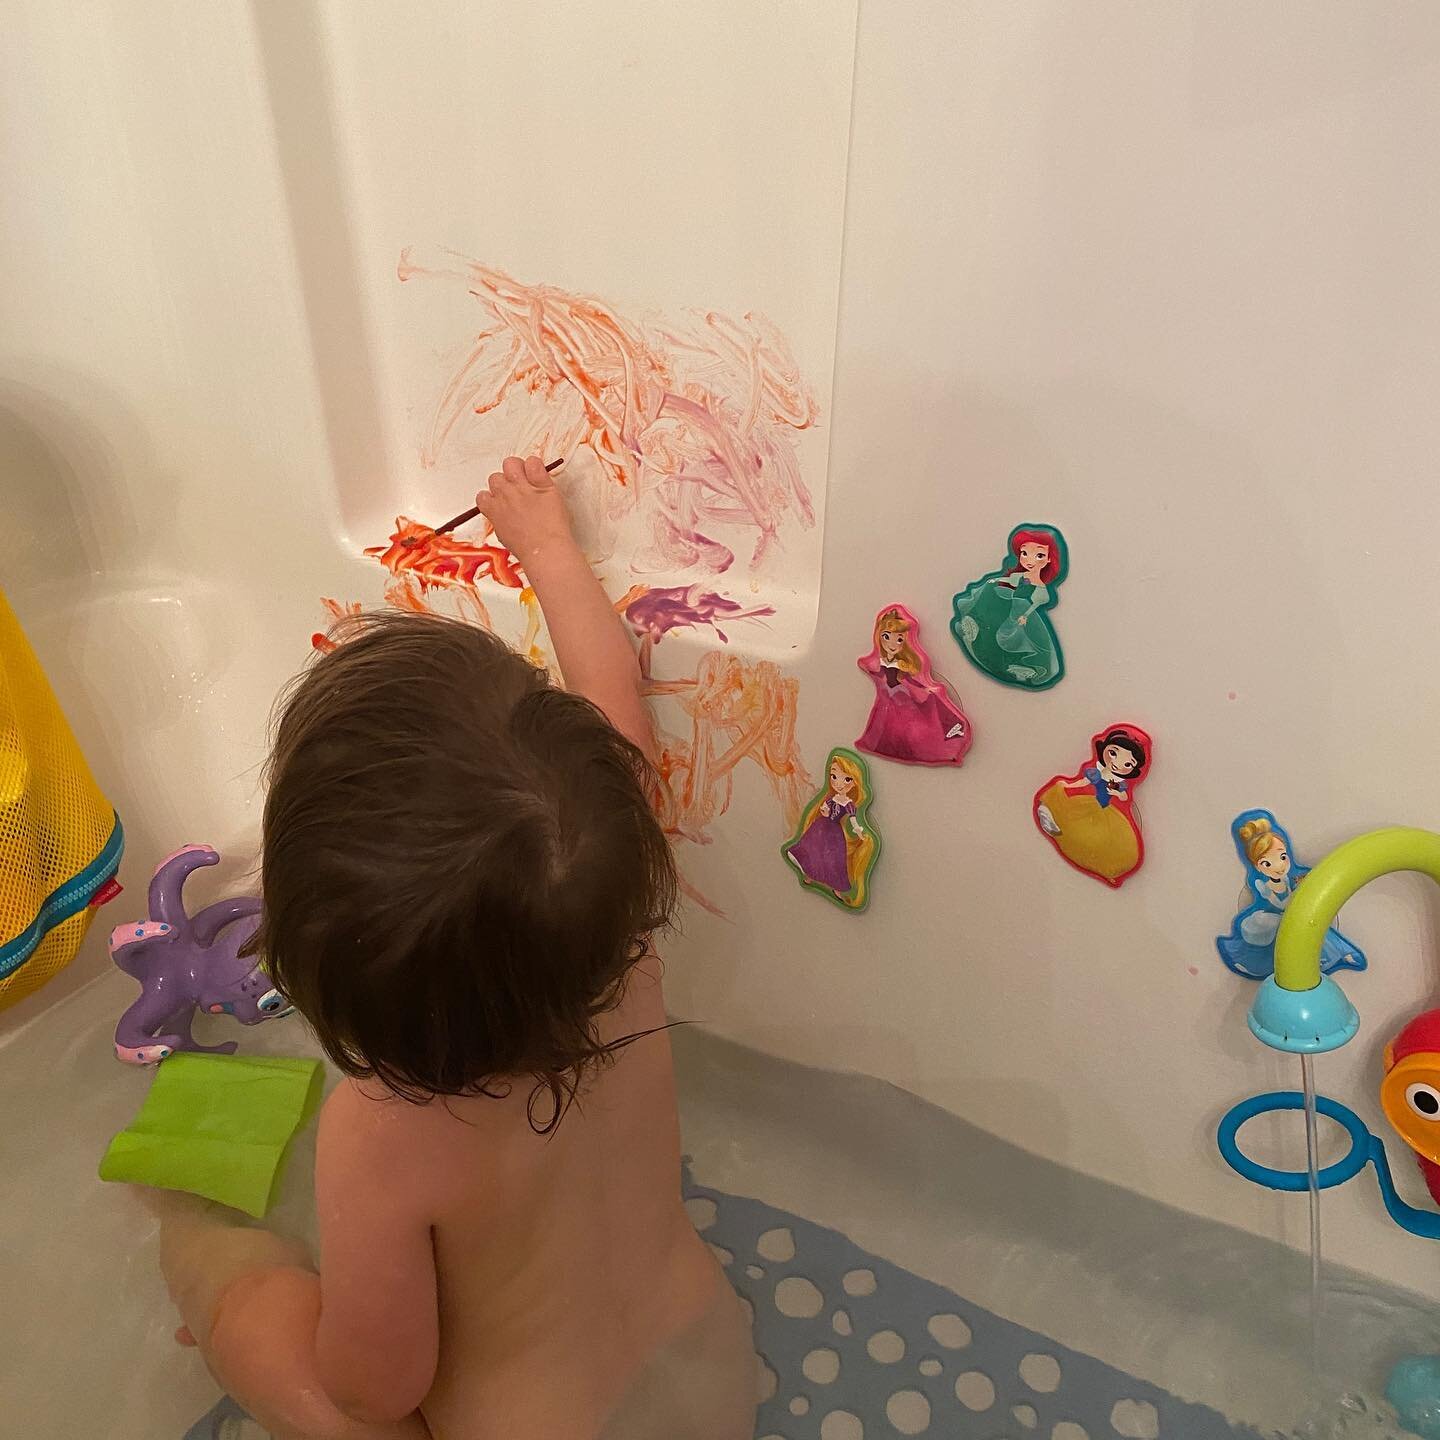 Painting in the tub #ittybittymisslily this will be harder to save.